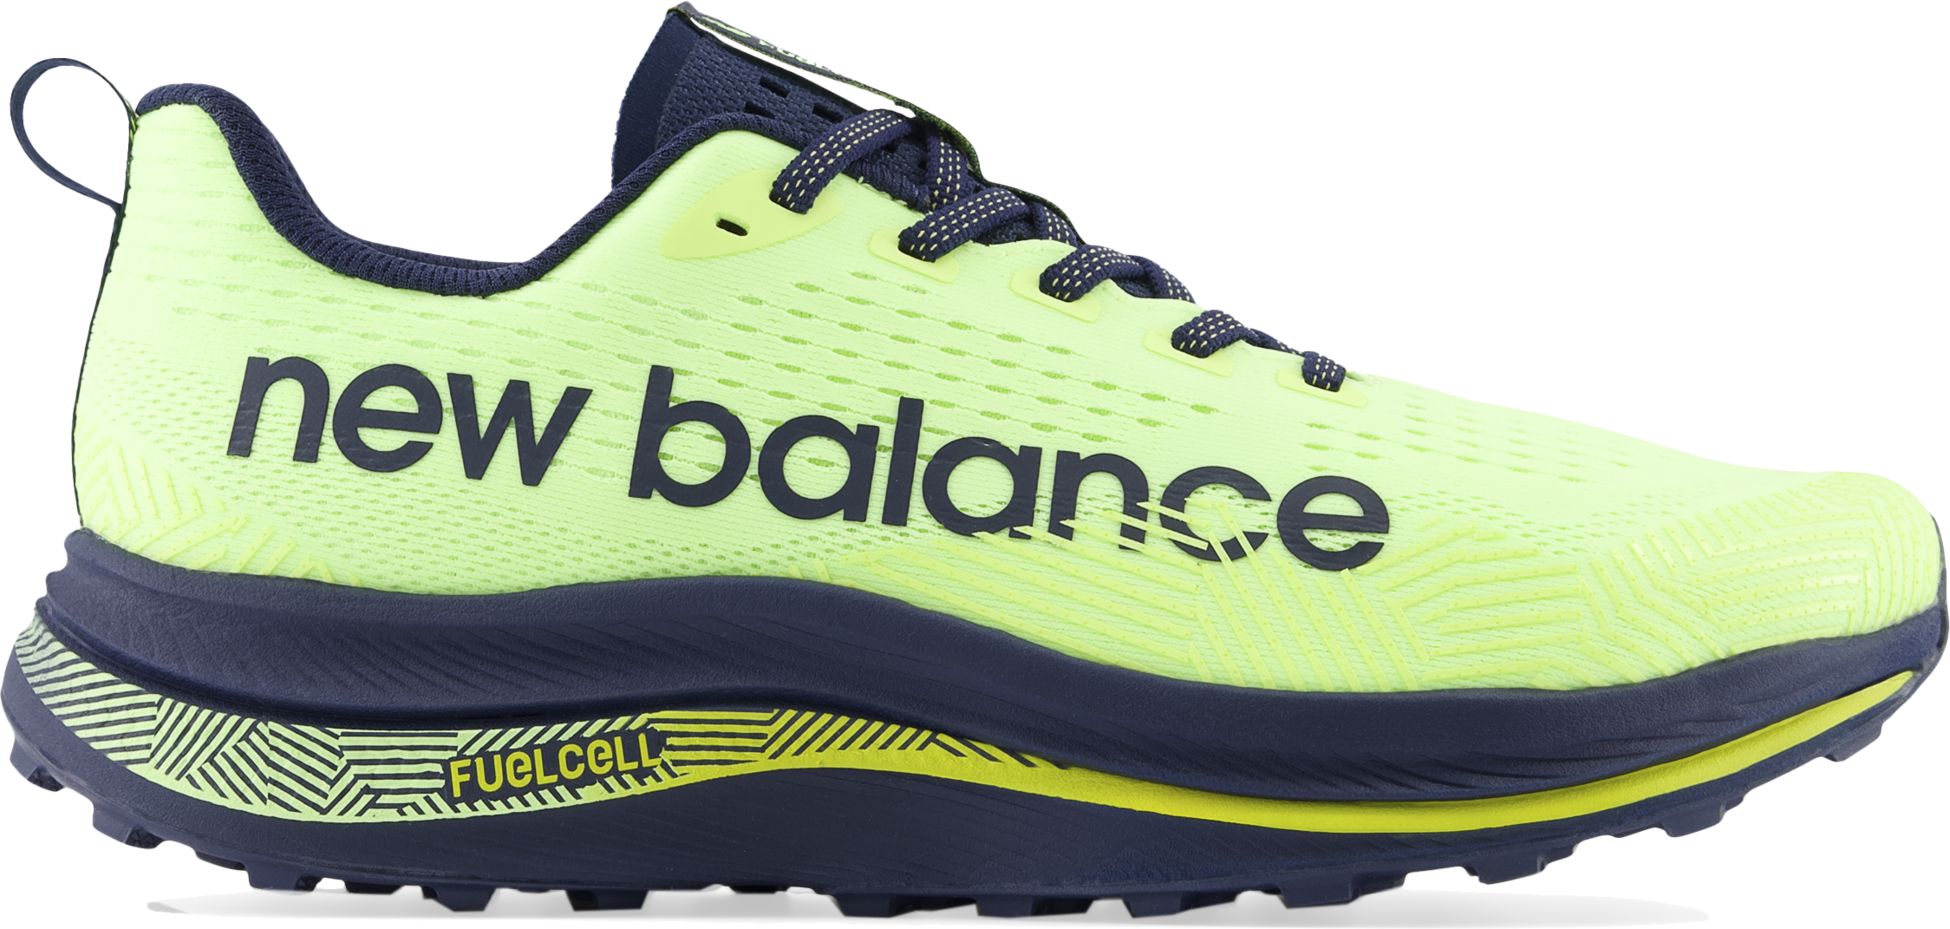 NEW BALANCE, M FUELCELL SC TRAIL